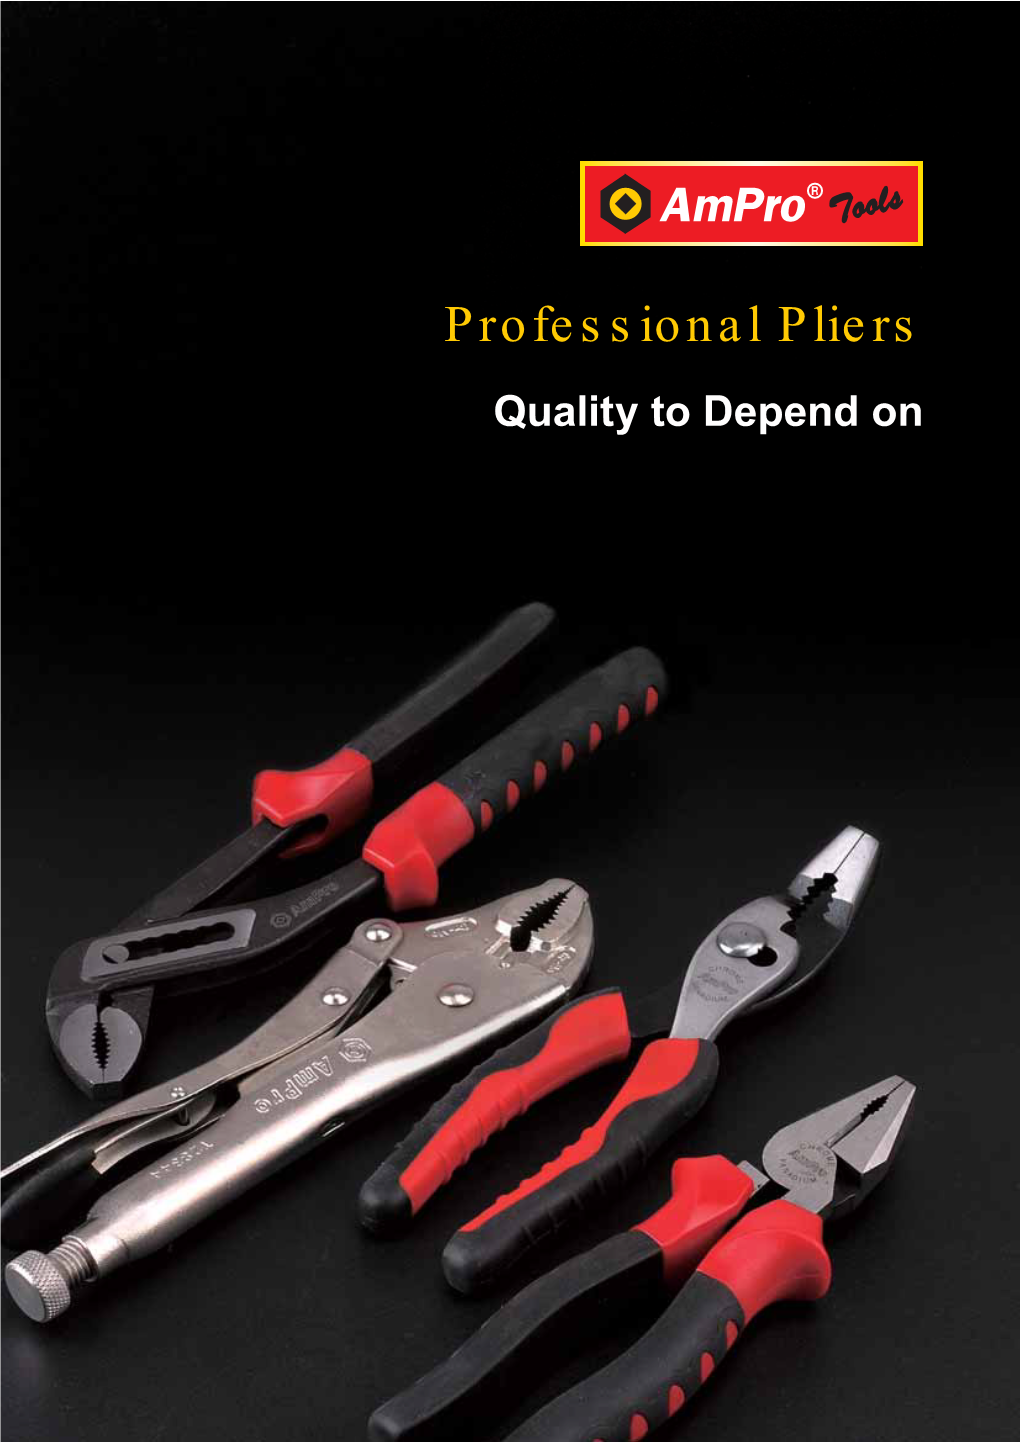 Professional Pliers Quality to Depend On